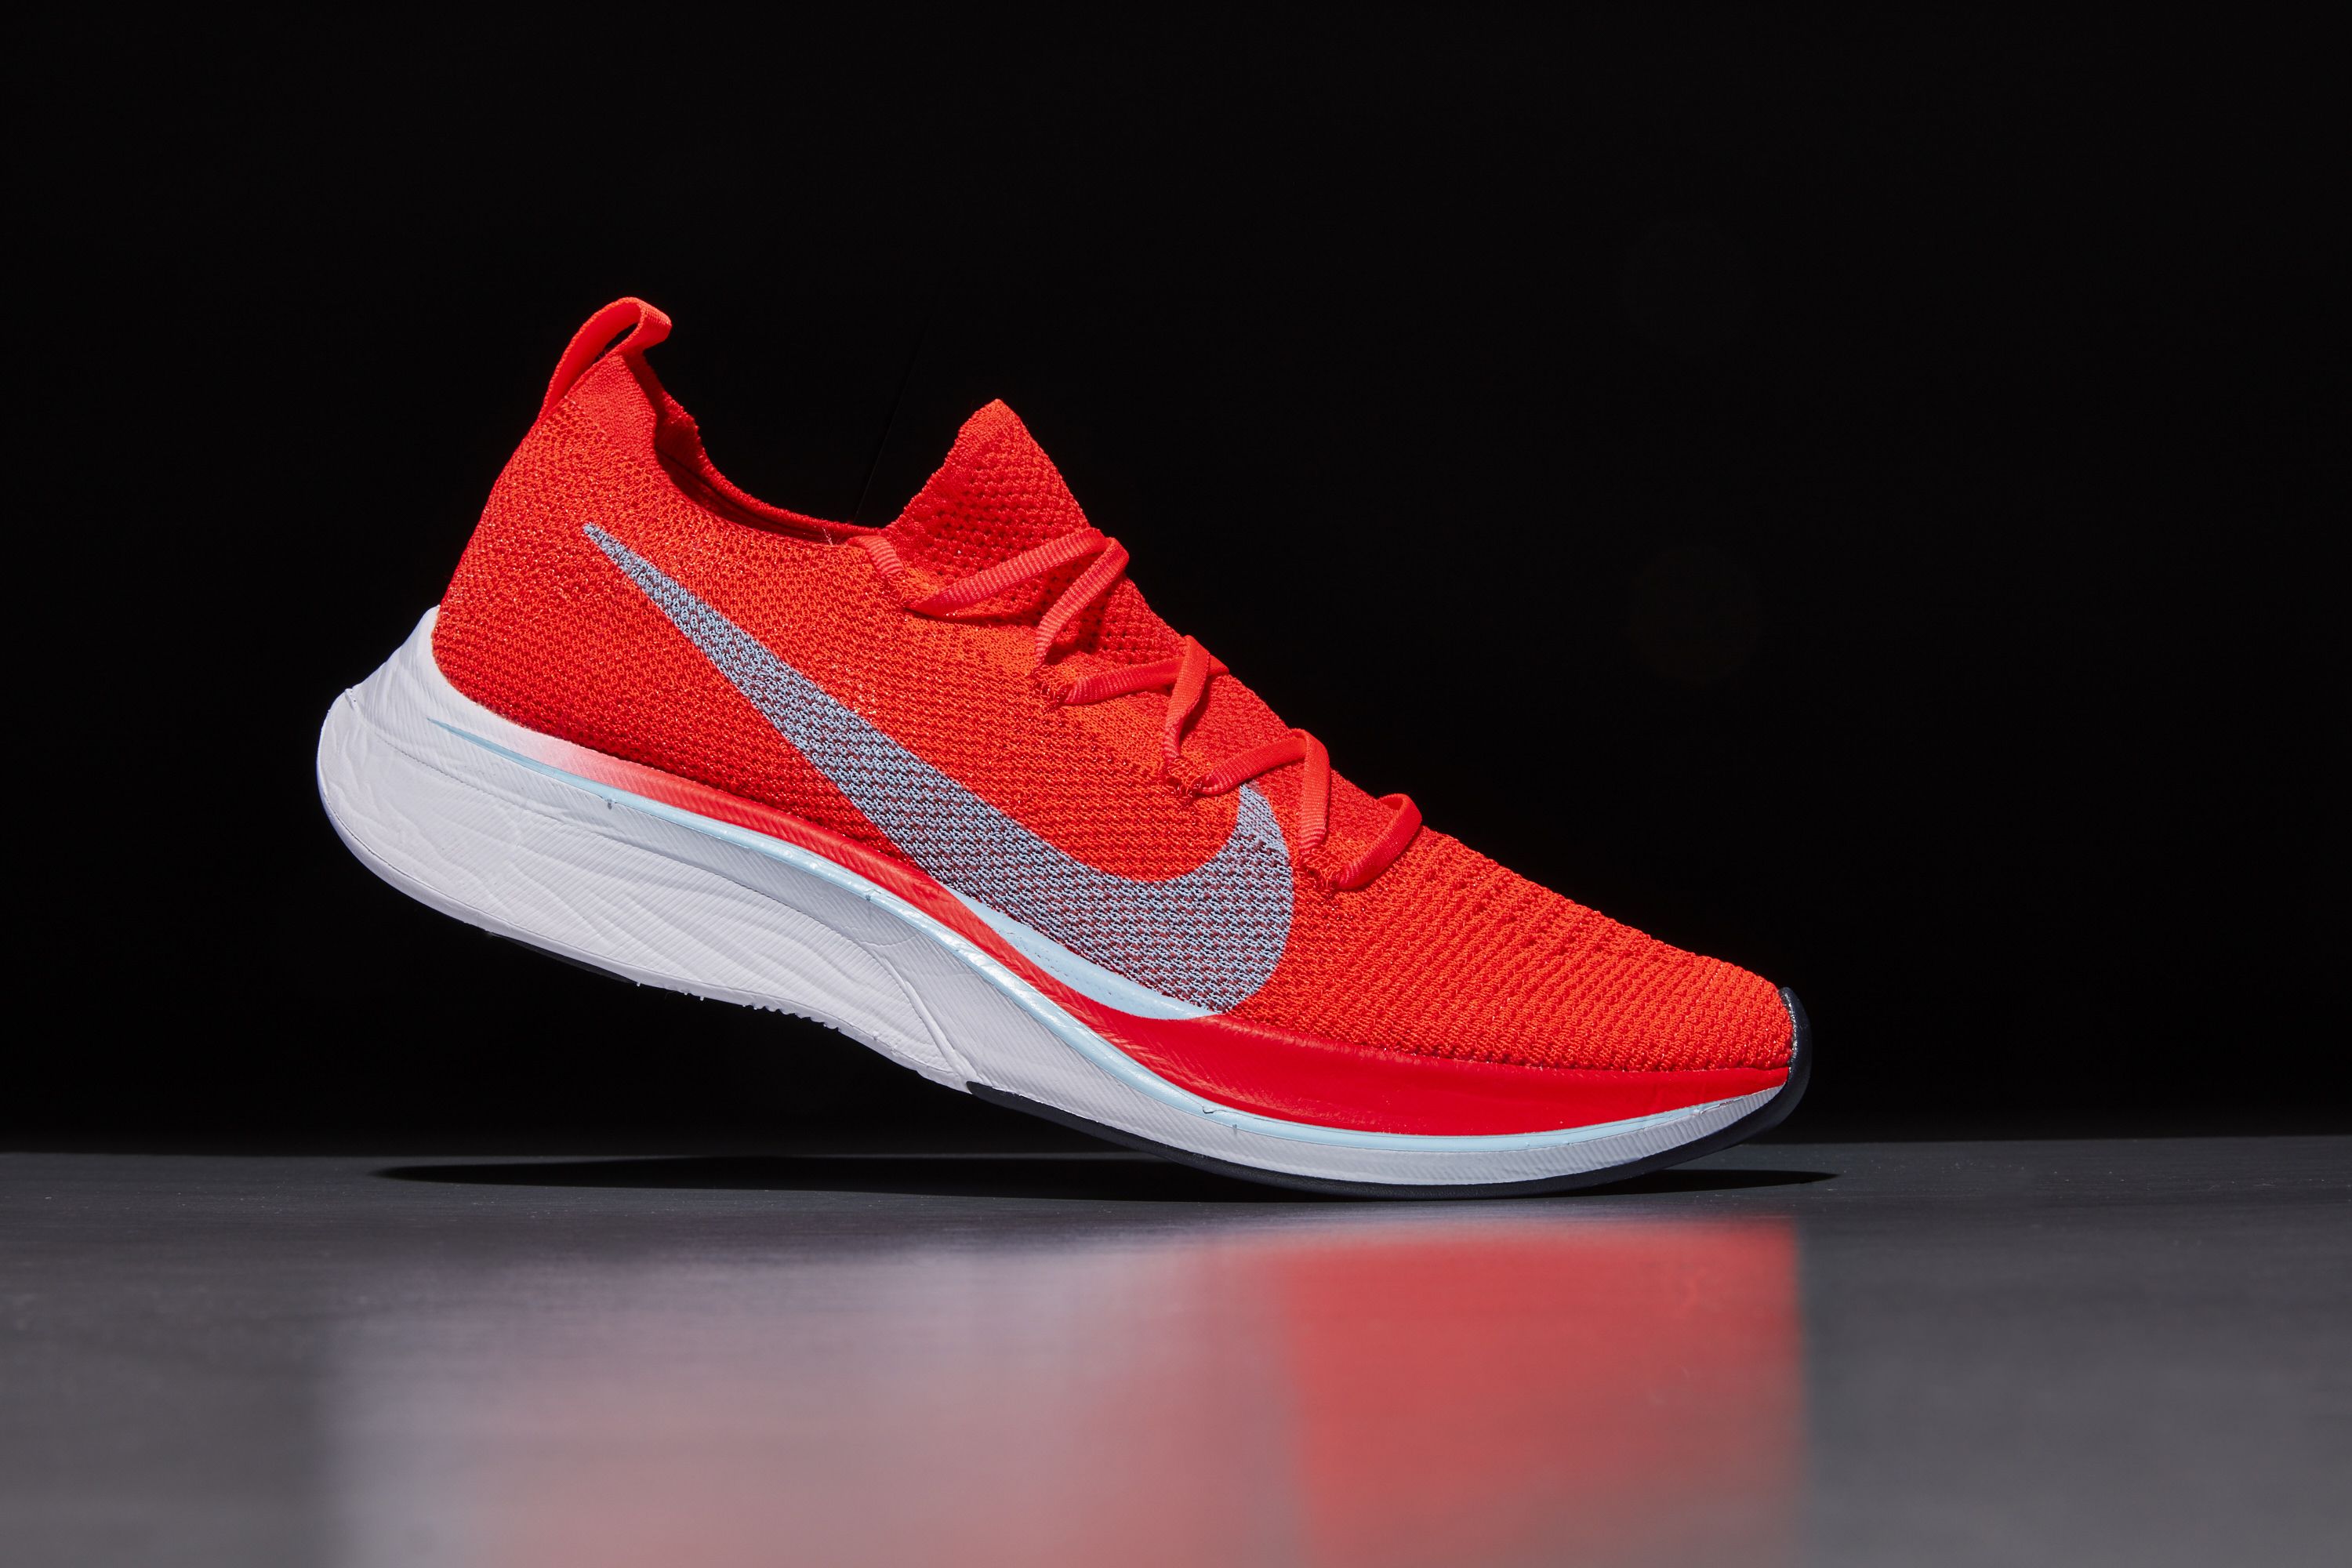 The Nike Vaporfly 4% Flyknit is On Sale Now